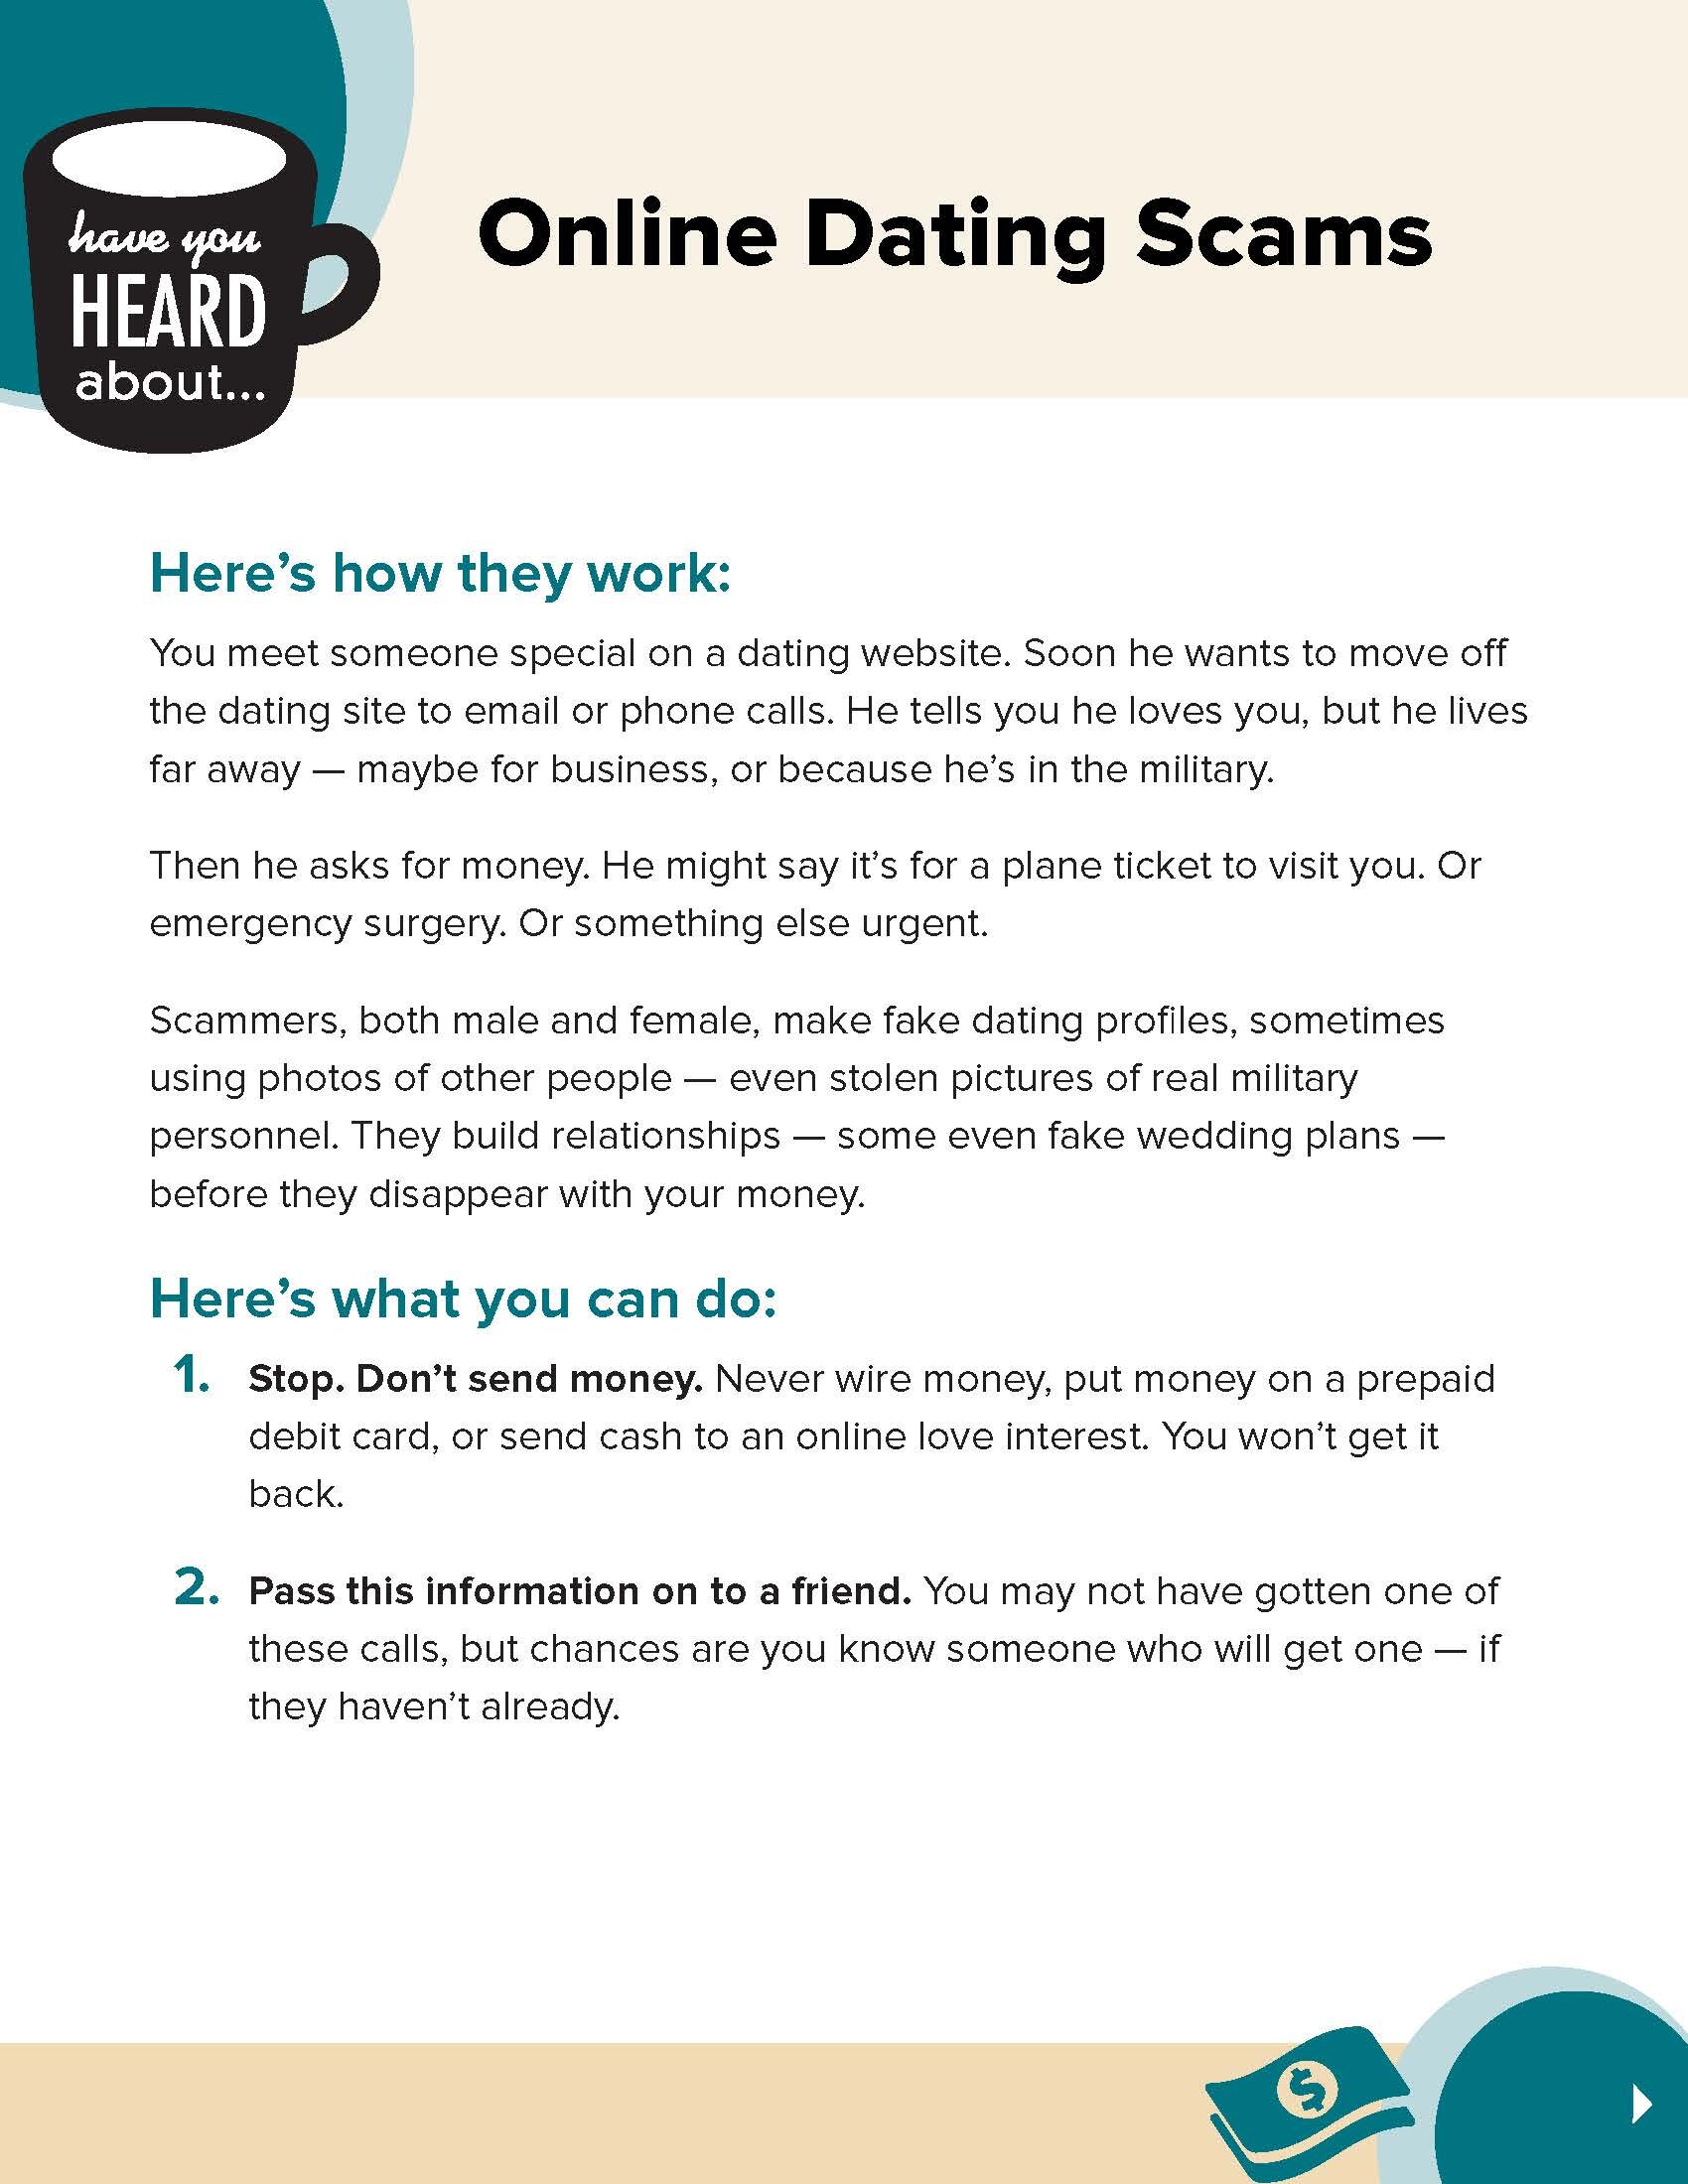 pdf-0214-online-dating-scams_Page_1.jpg